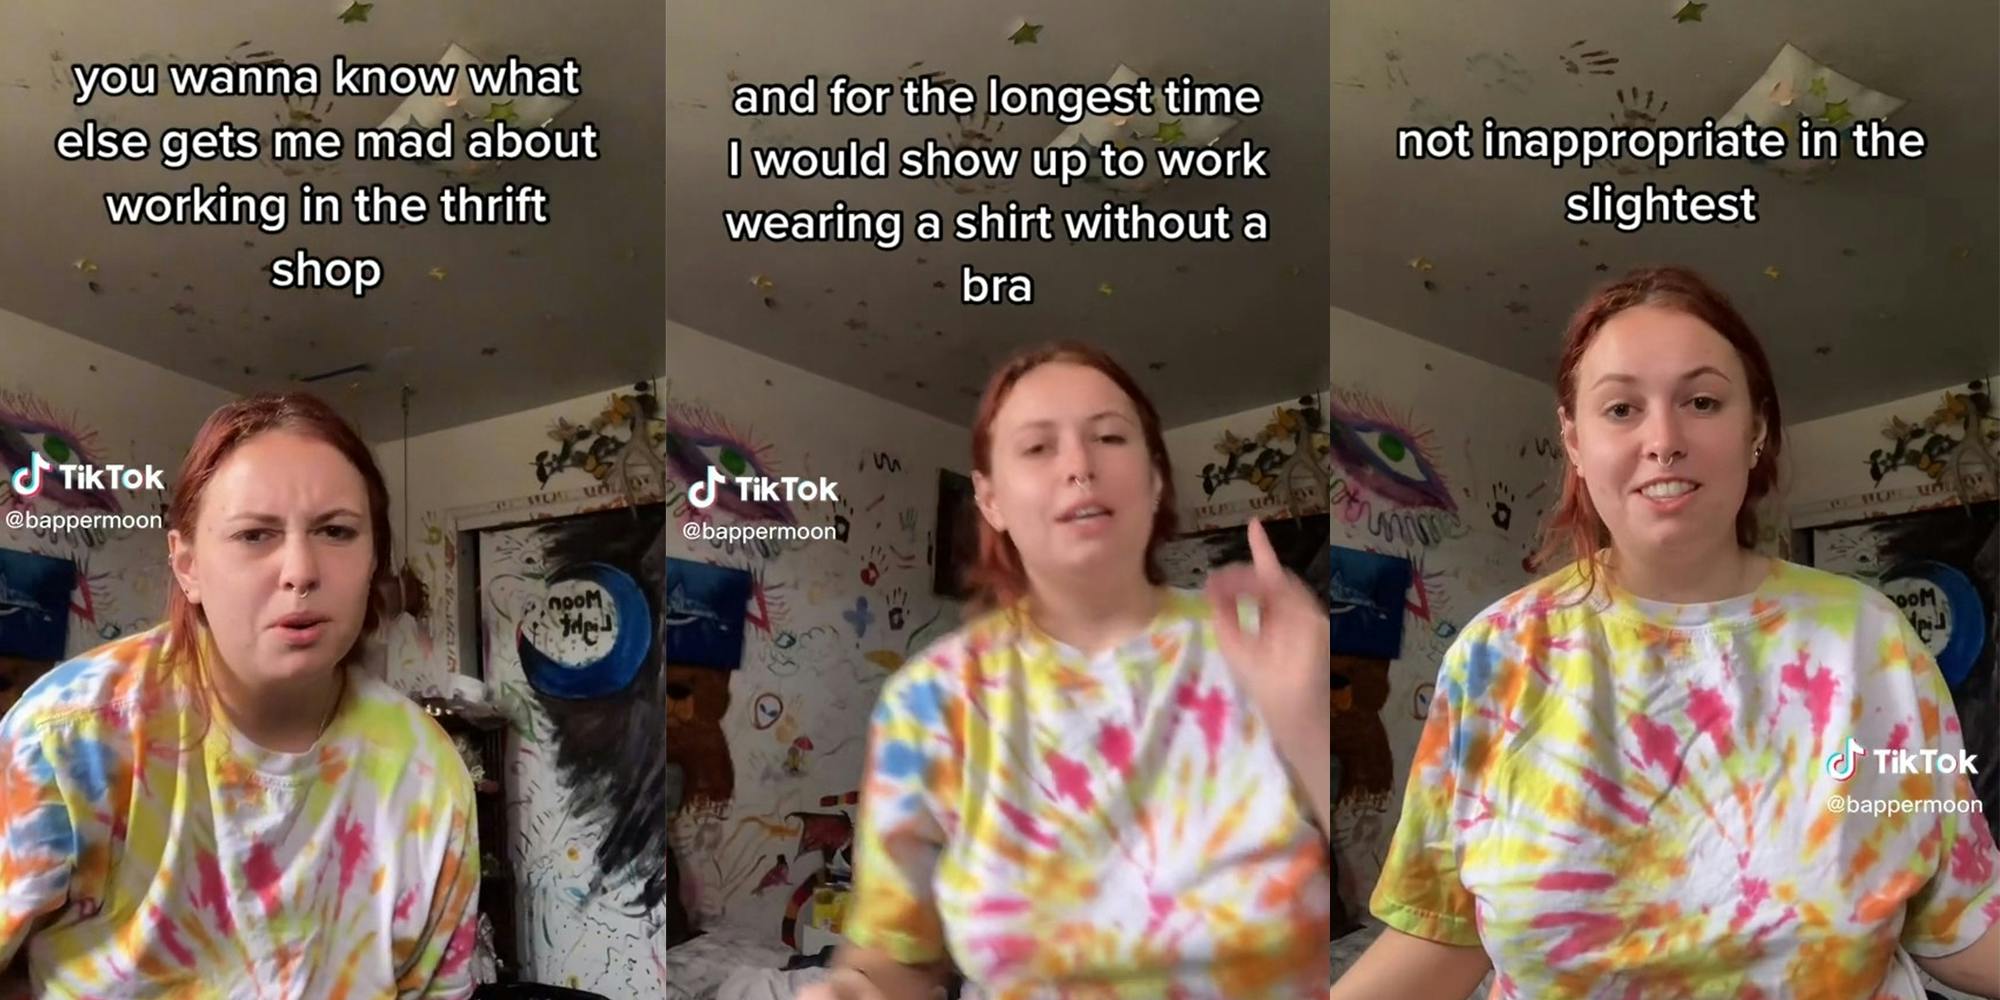 Thrift shop worker says manager humiliated her for not wearing a bra in front of customers